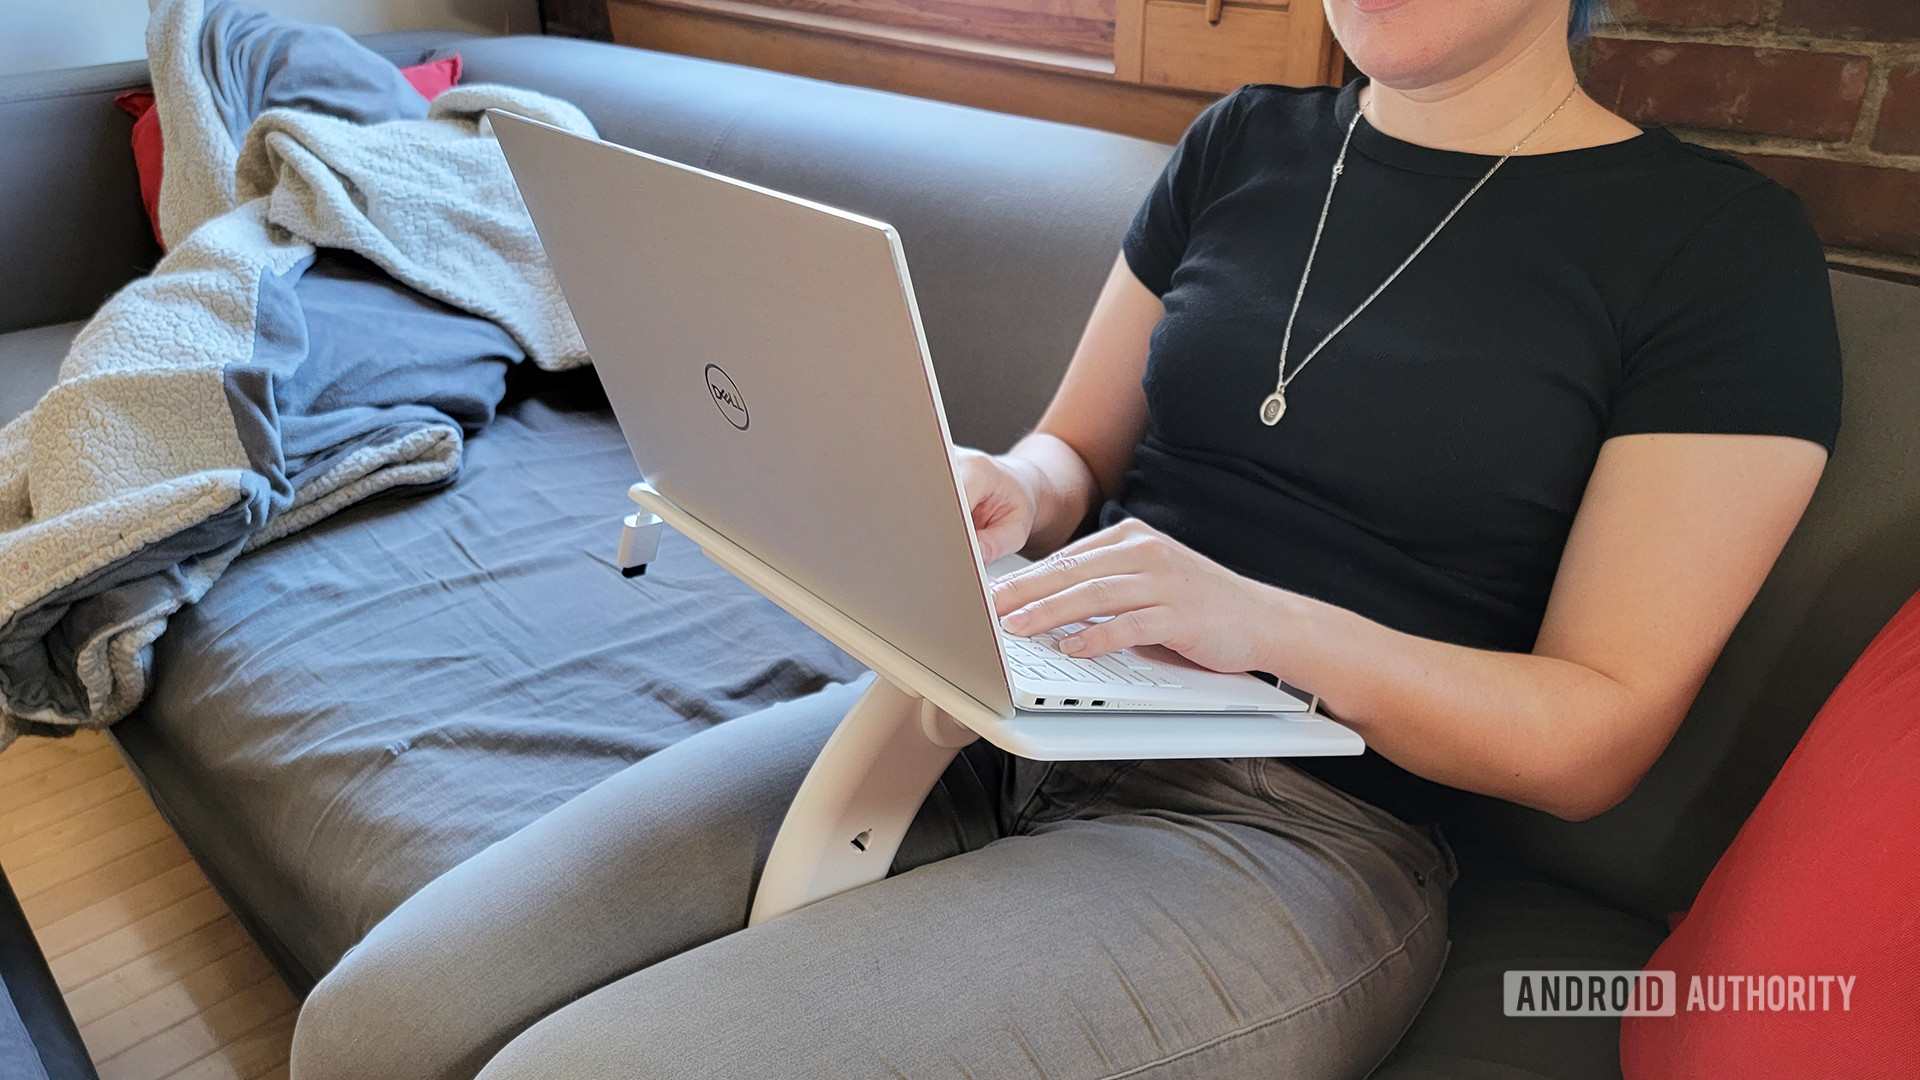 A woman sits with a Lamouple Lap Desk on her lap and a Dell laptop on top.